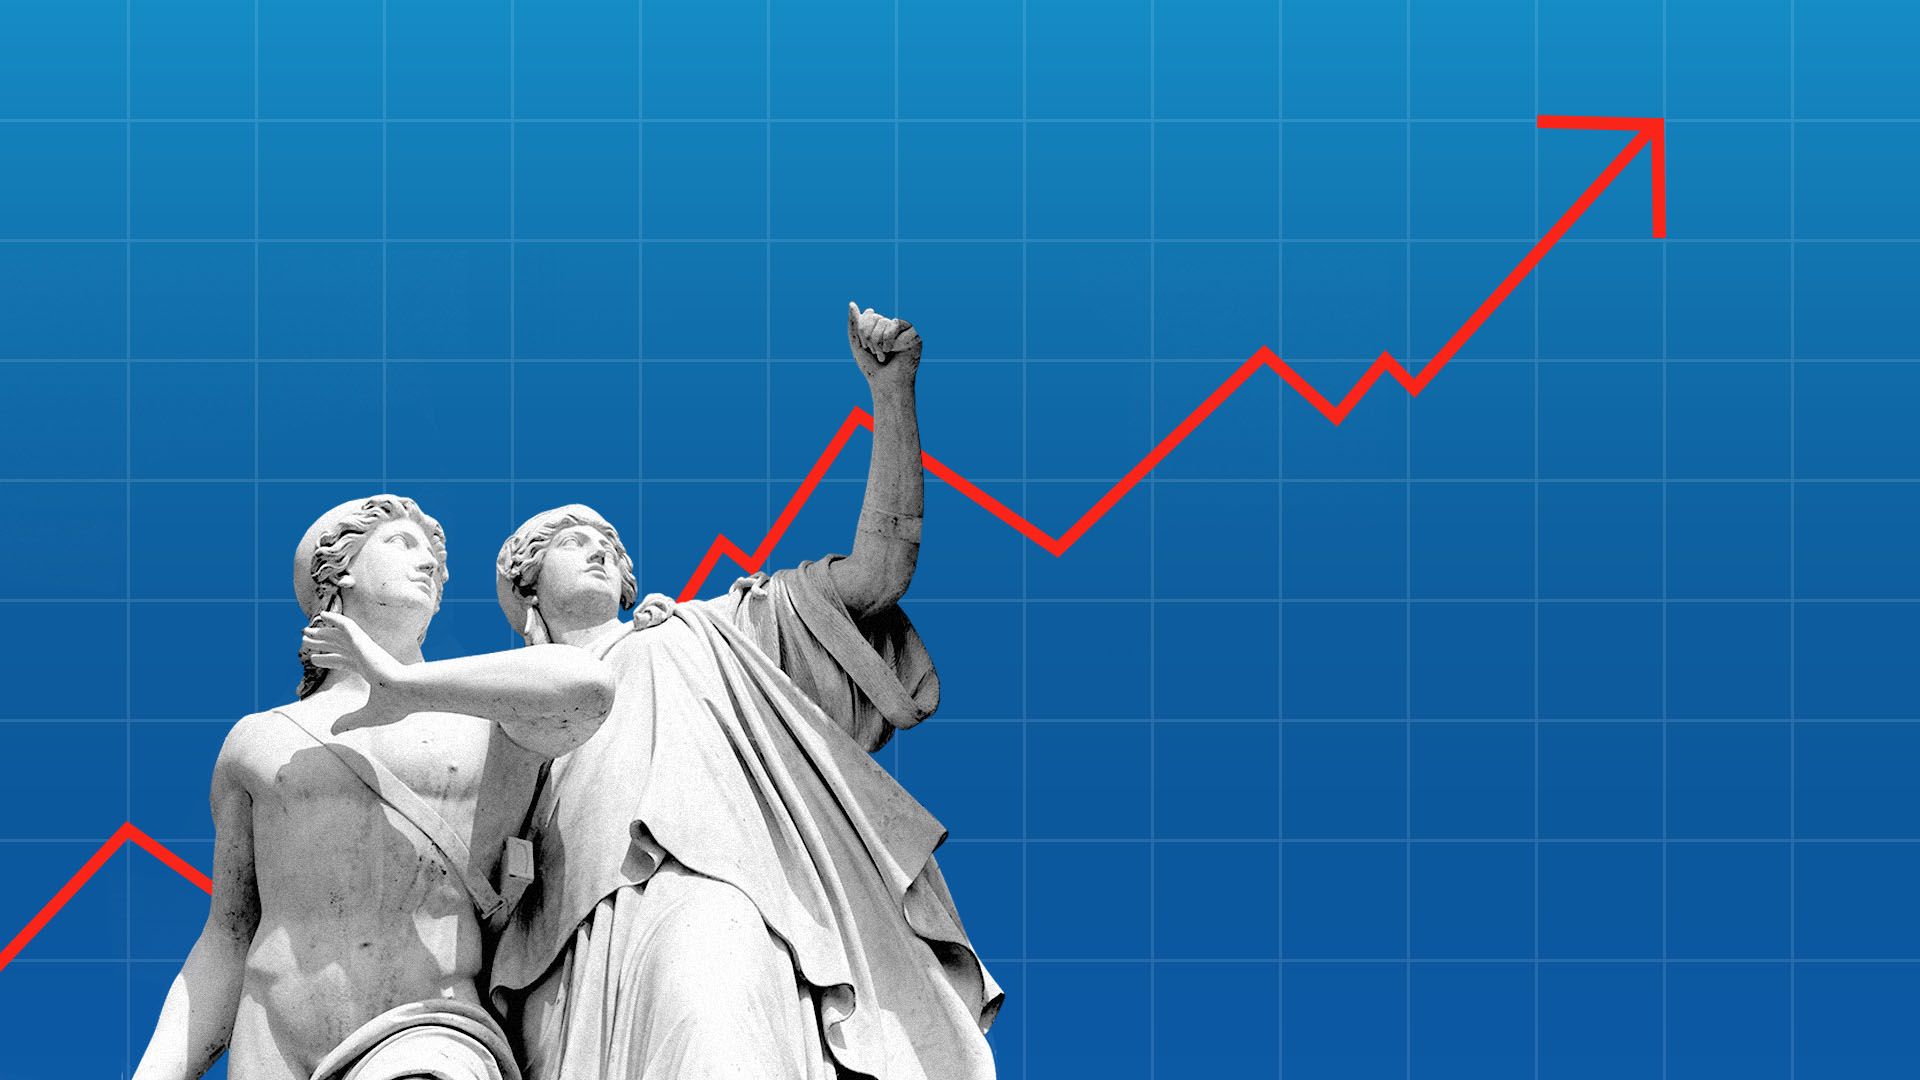 Illustration of an upward trending stock chart with Greek statues cheering on